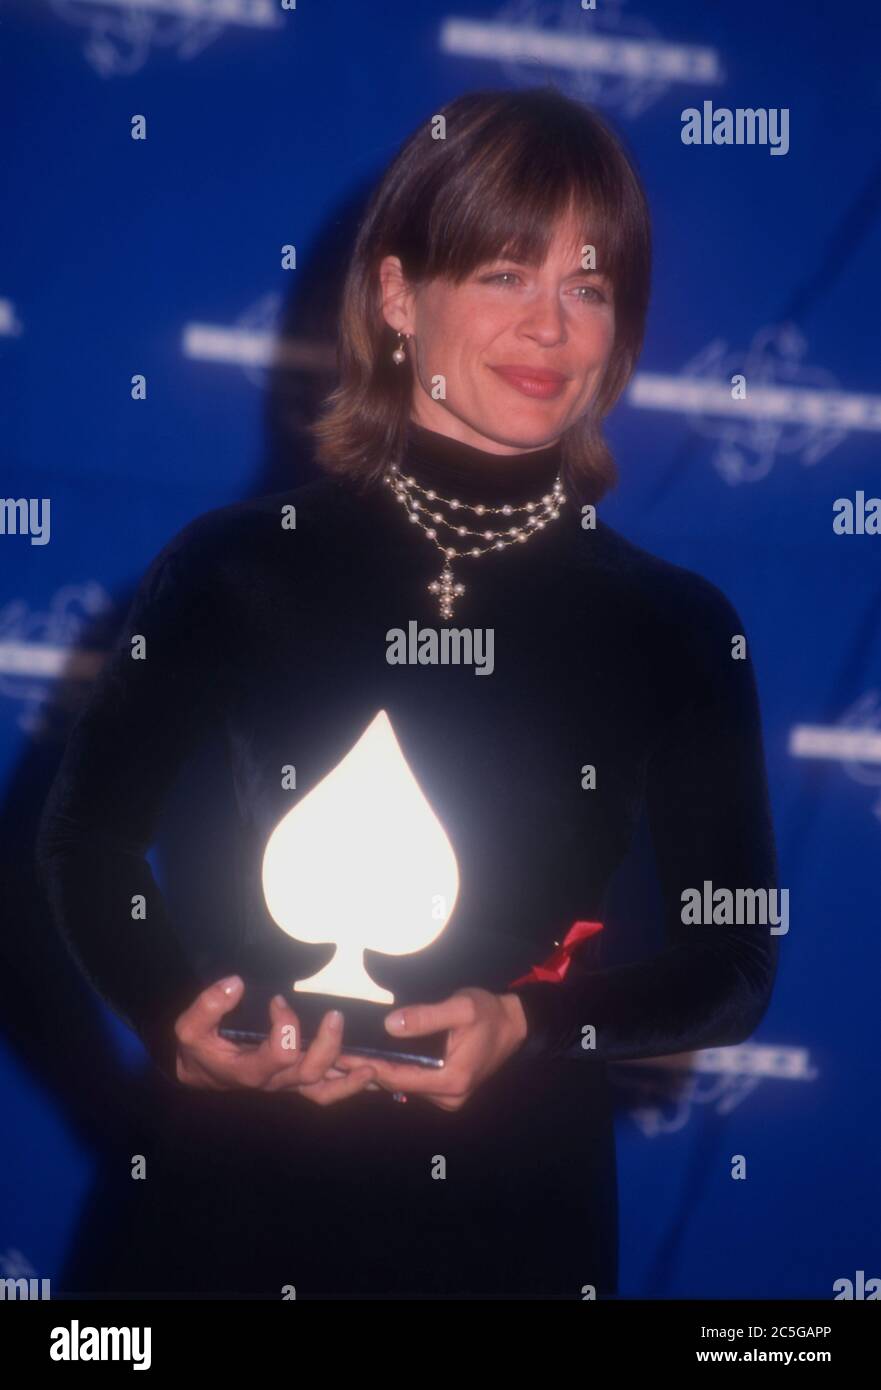 Los Angeles, California, USA 2nd December 1995 Actress Linda Hamilton attends 17th Annual CableACE Awards on December 2, 1995 at The Wiltern in Los Angeles, California, USA. Photo by Barry King/Alamy Stock Photo Stock Photo